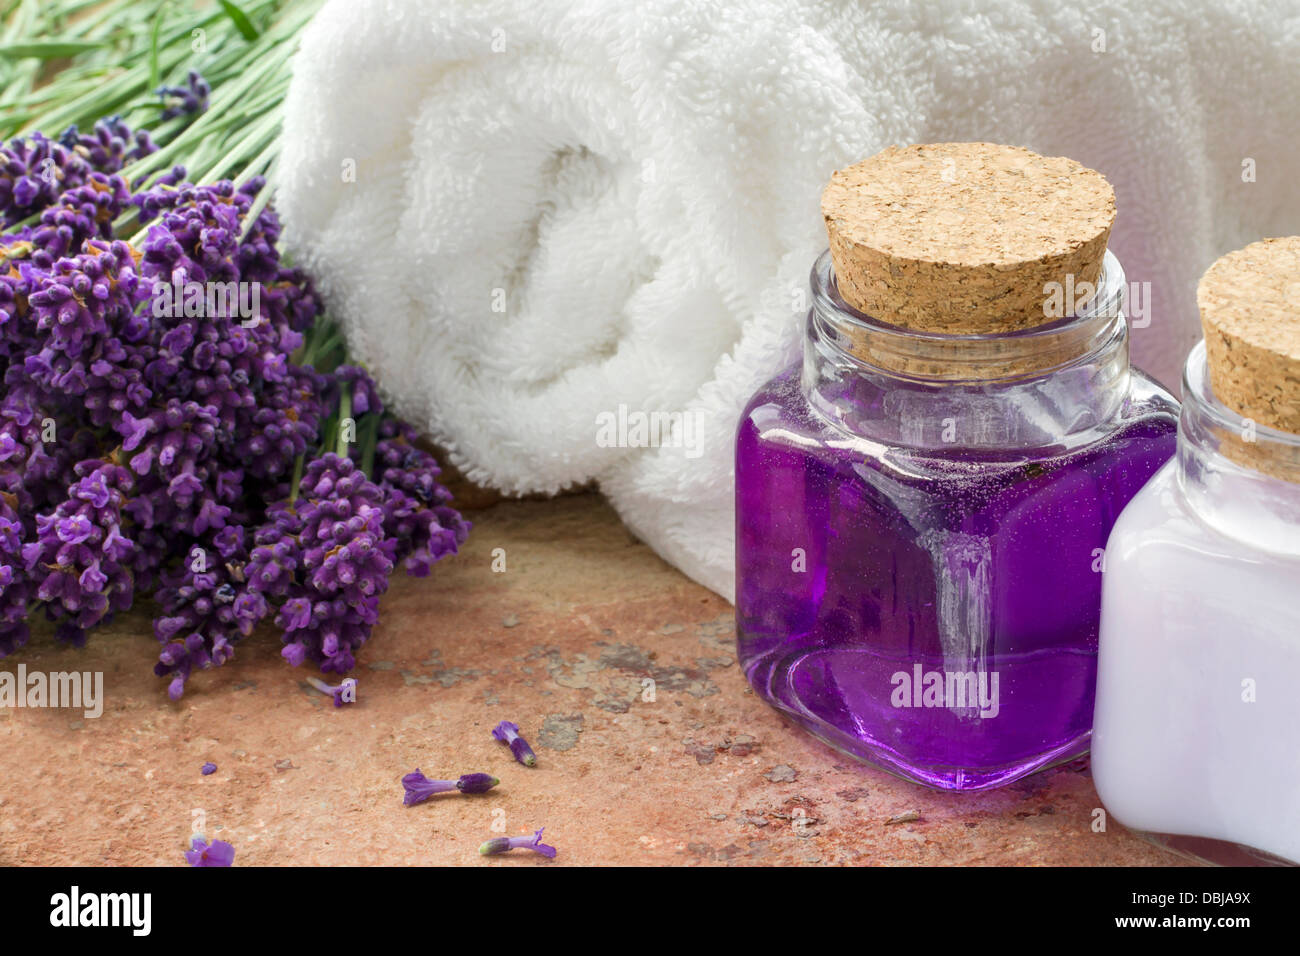 Spa wellness products with lavender Stock Photo